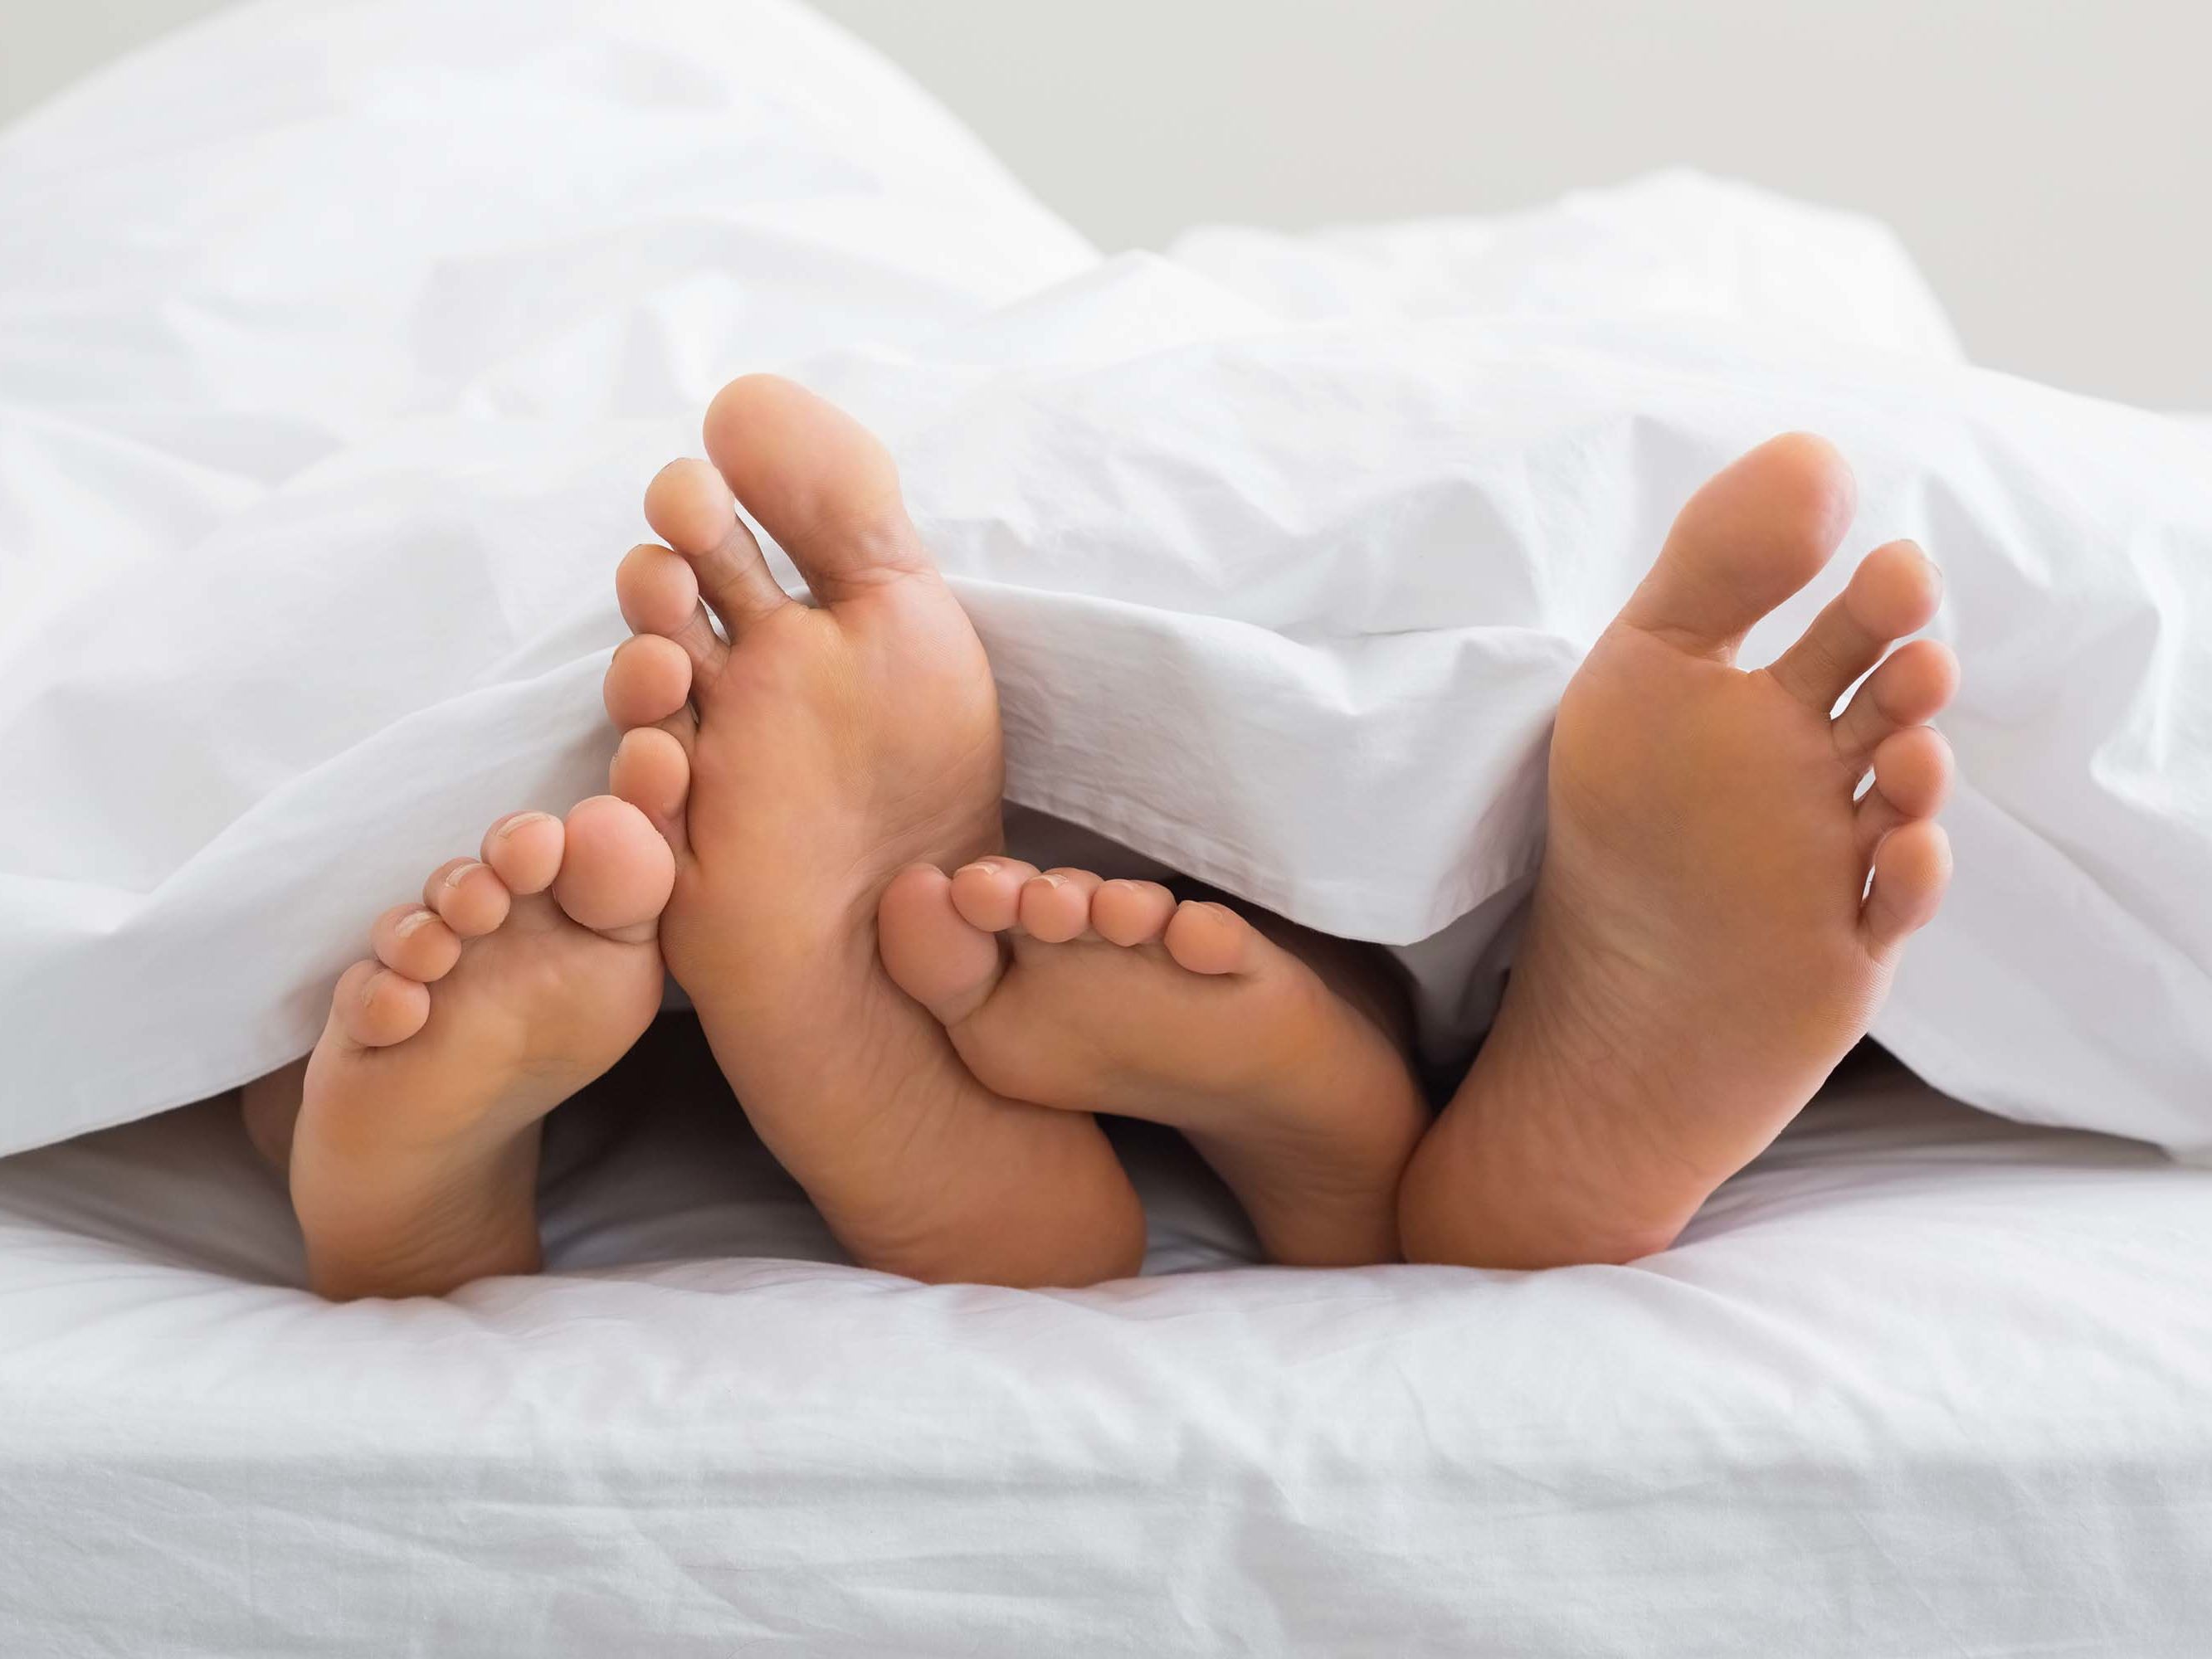 Sleeping Virgin Sex - About 1 in 4 Japanese adults in their 20s and 30s is a virgin, study says |  CNN